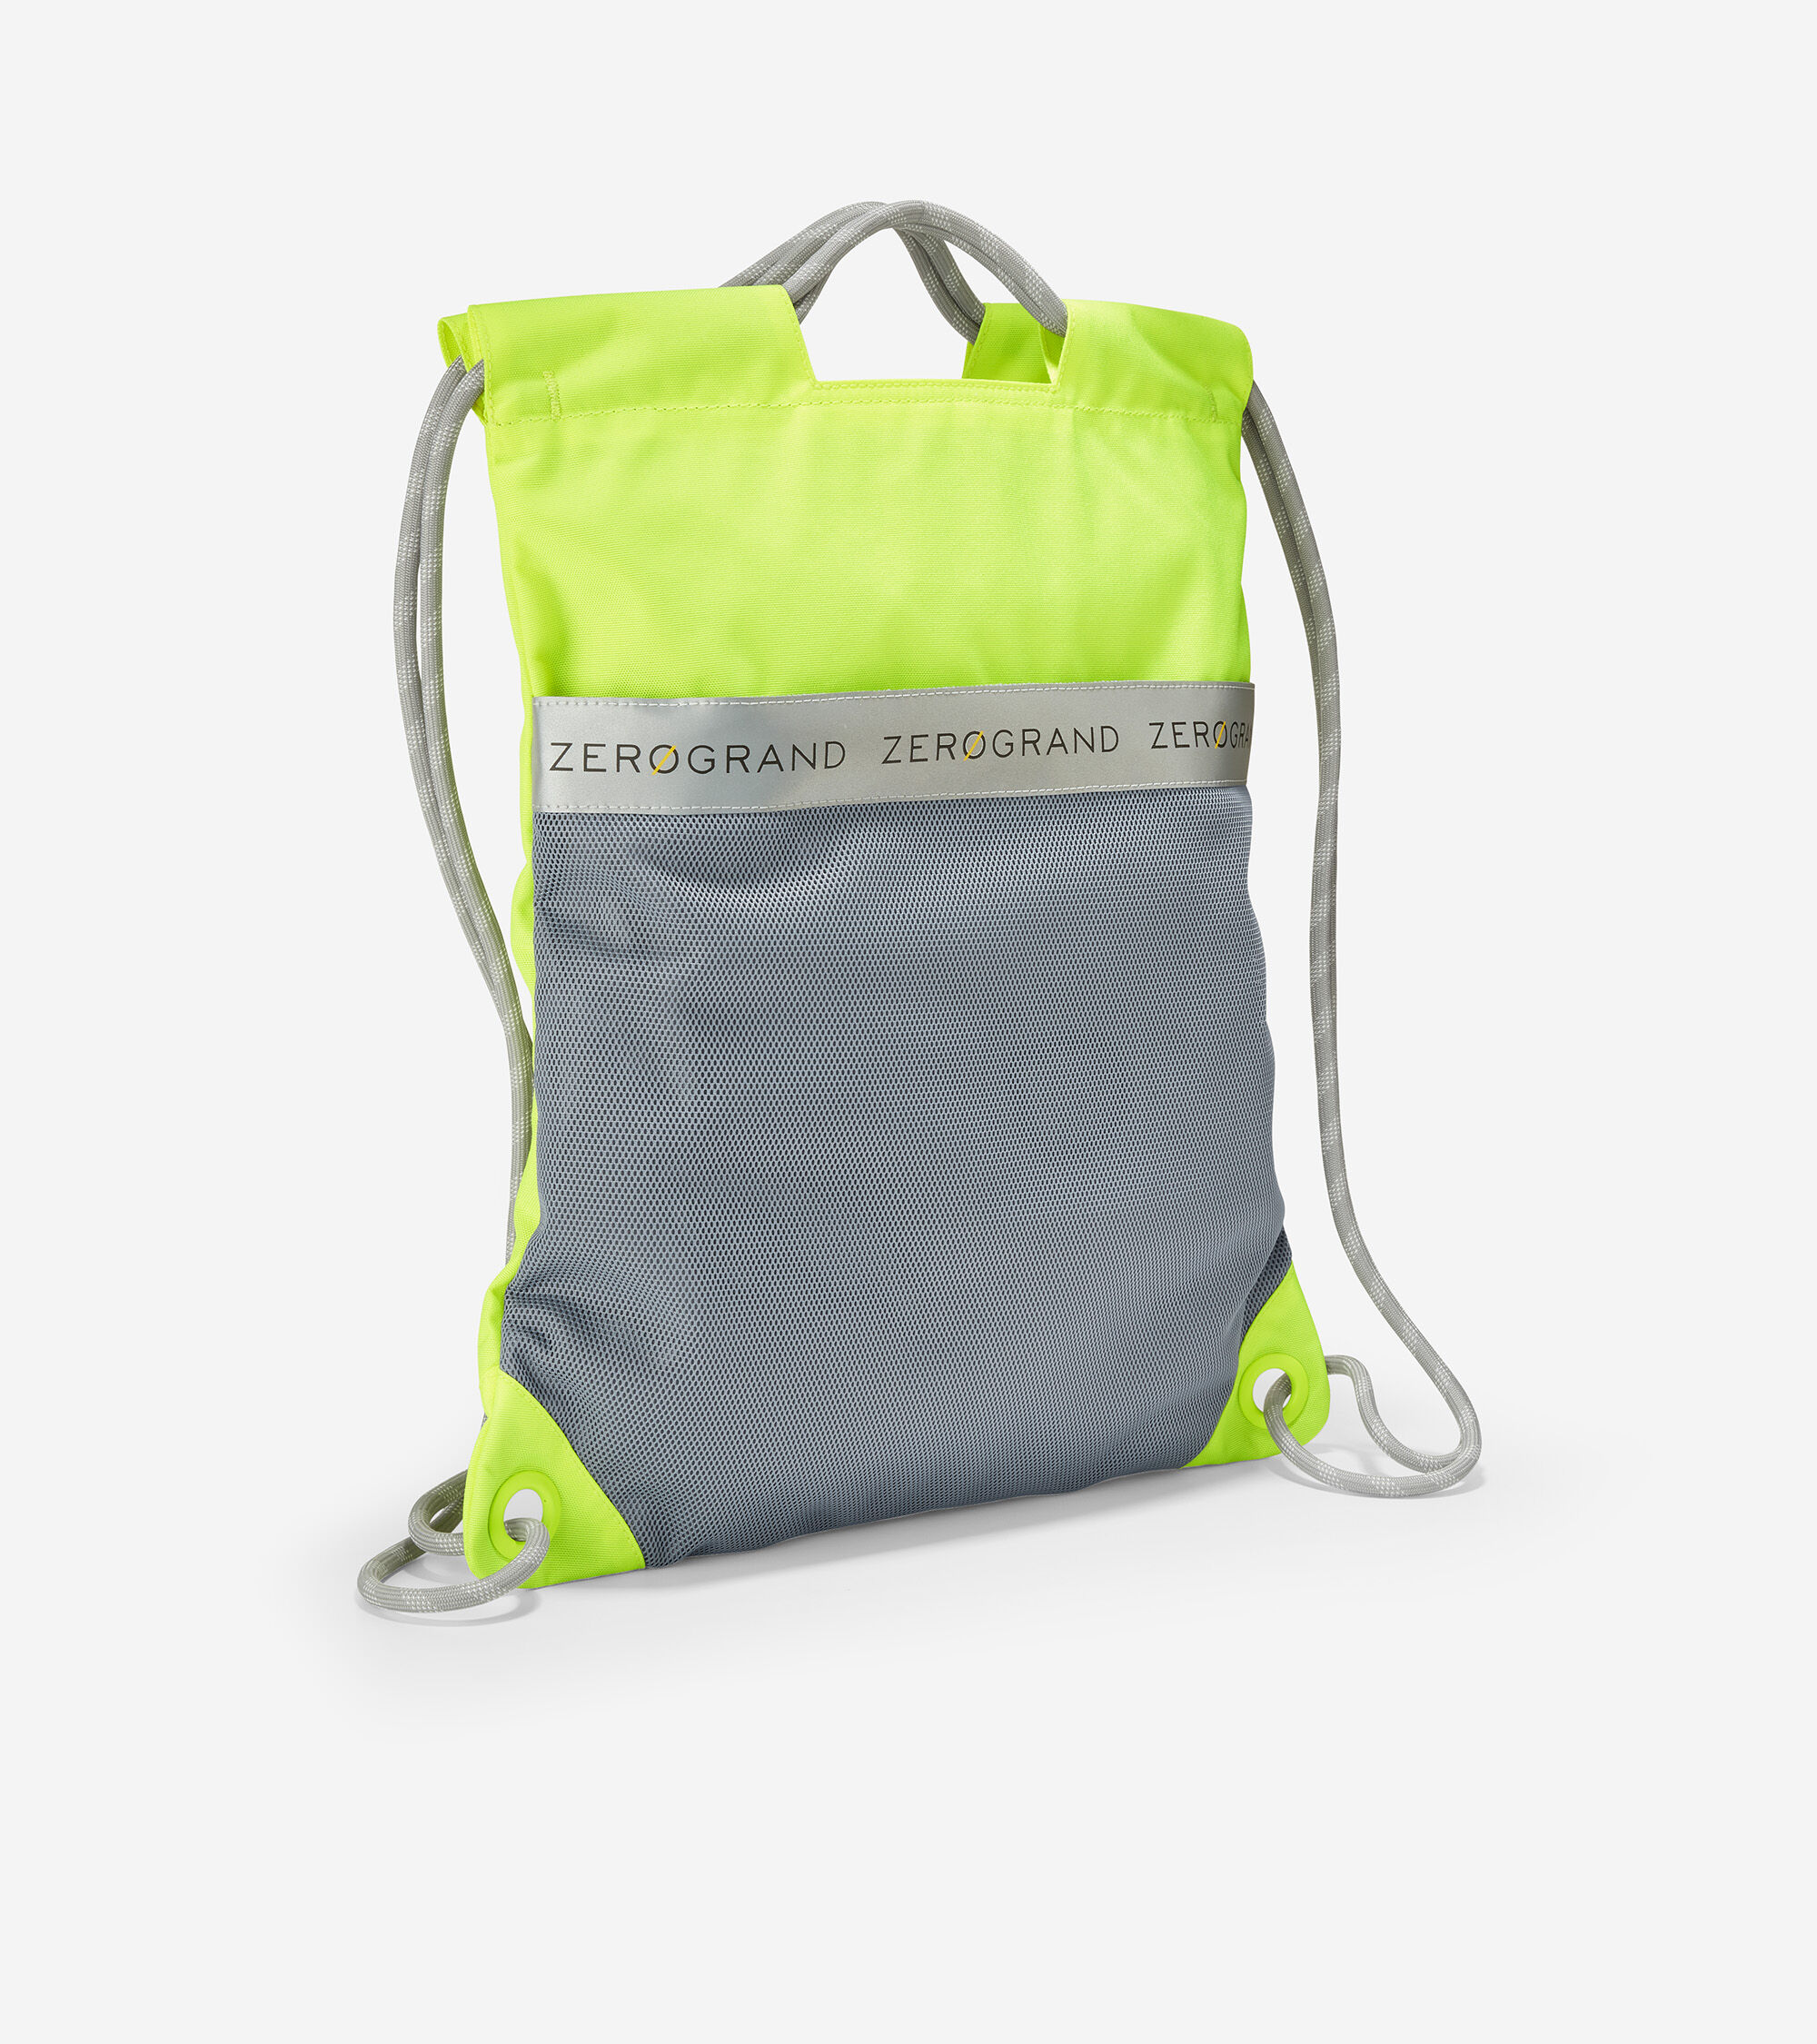 ZERØGRAND String Backpack in YELLOW   Cole Haan